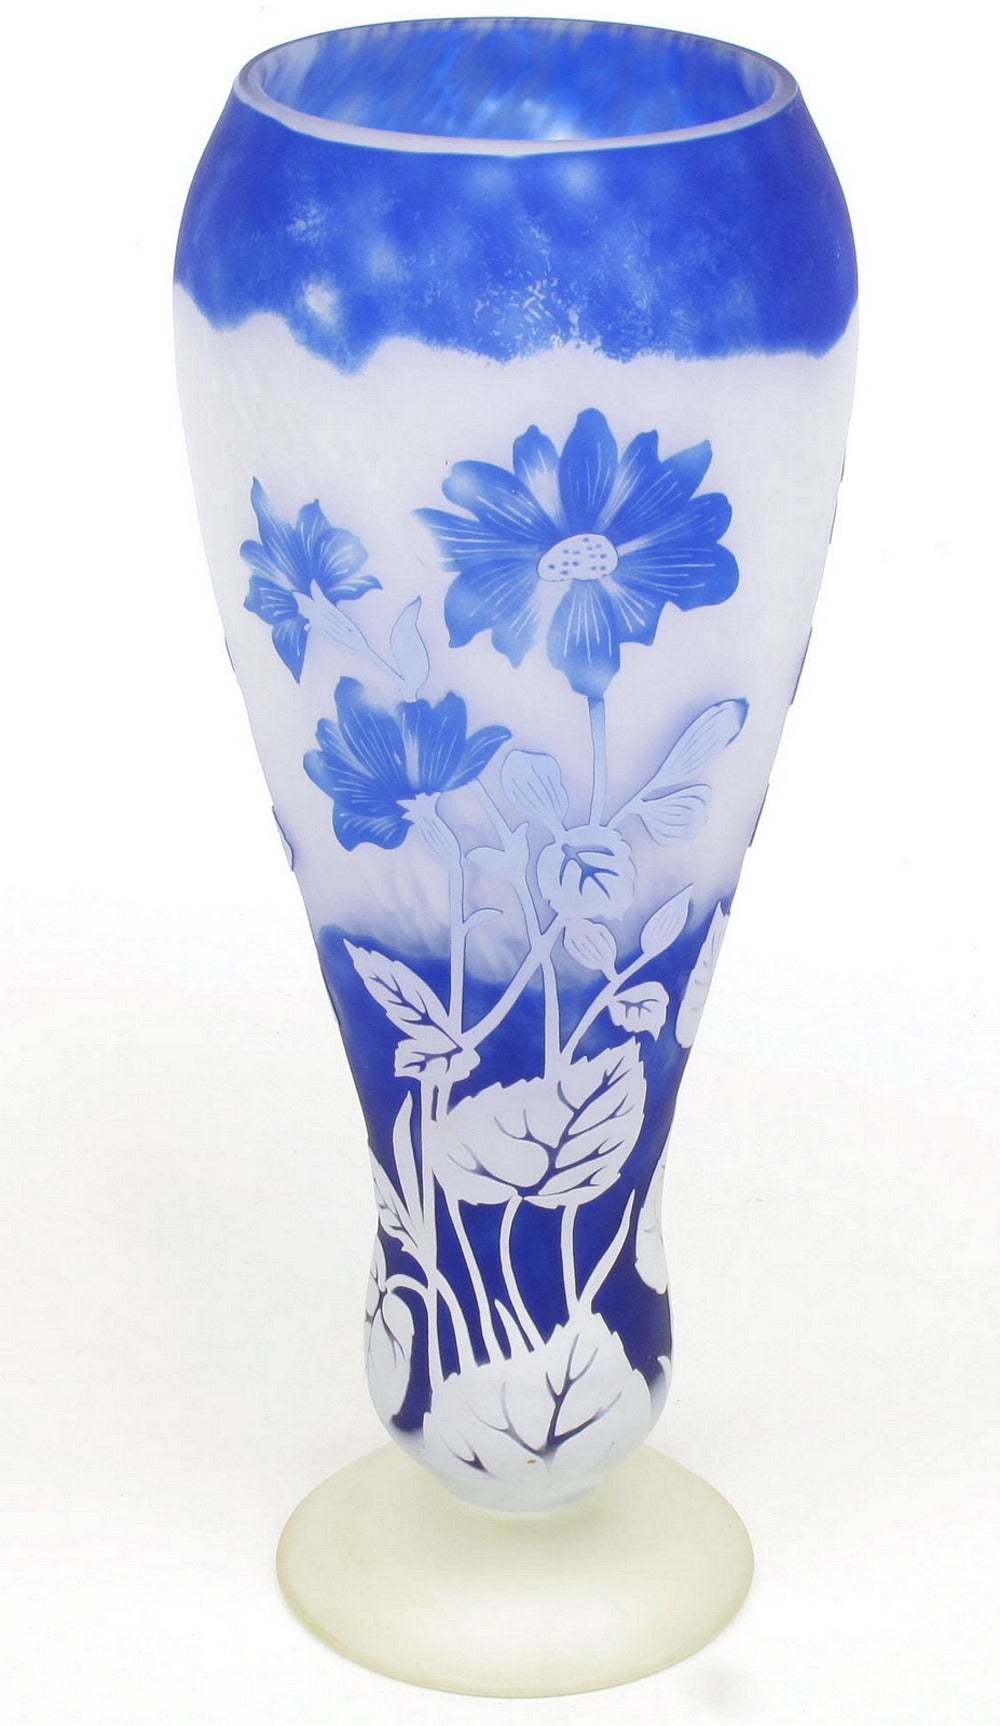 Shannon of Ireland cut art glass with floral design. Cased glass of blue and clear is cut and sandblasted to various depths. Mouth blown and hand-cut.